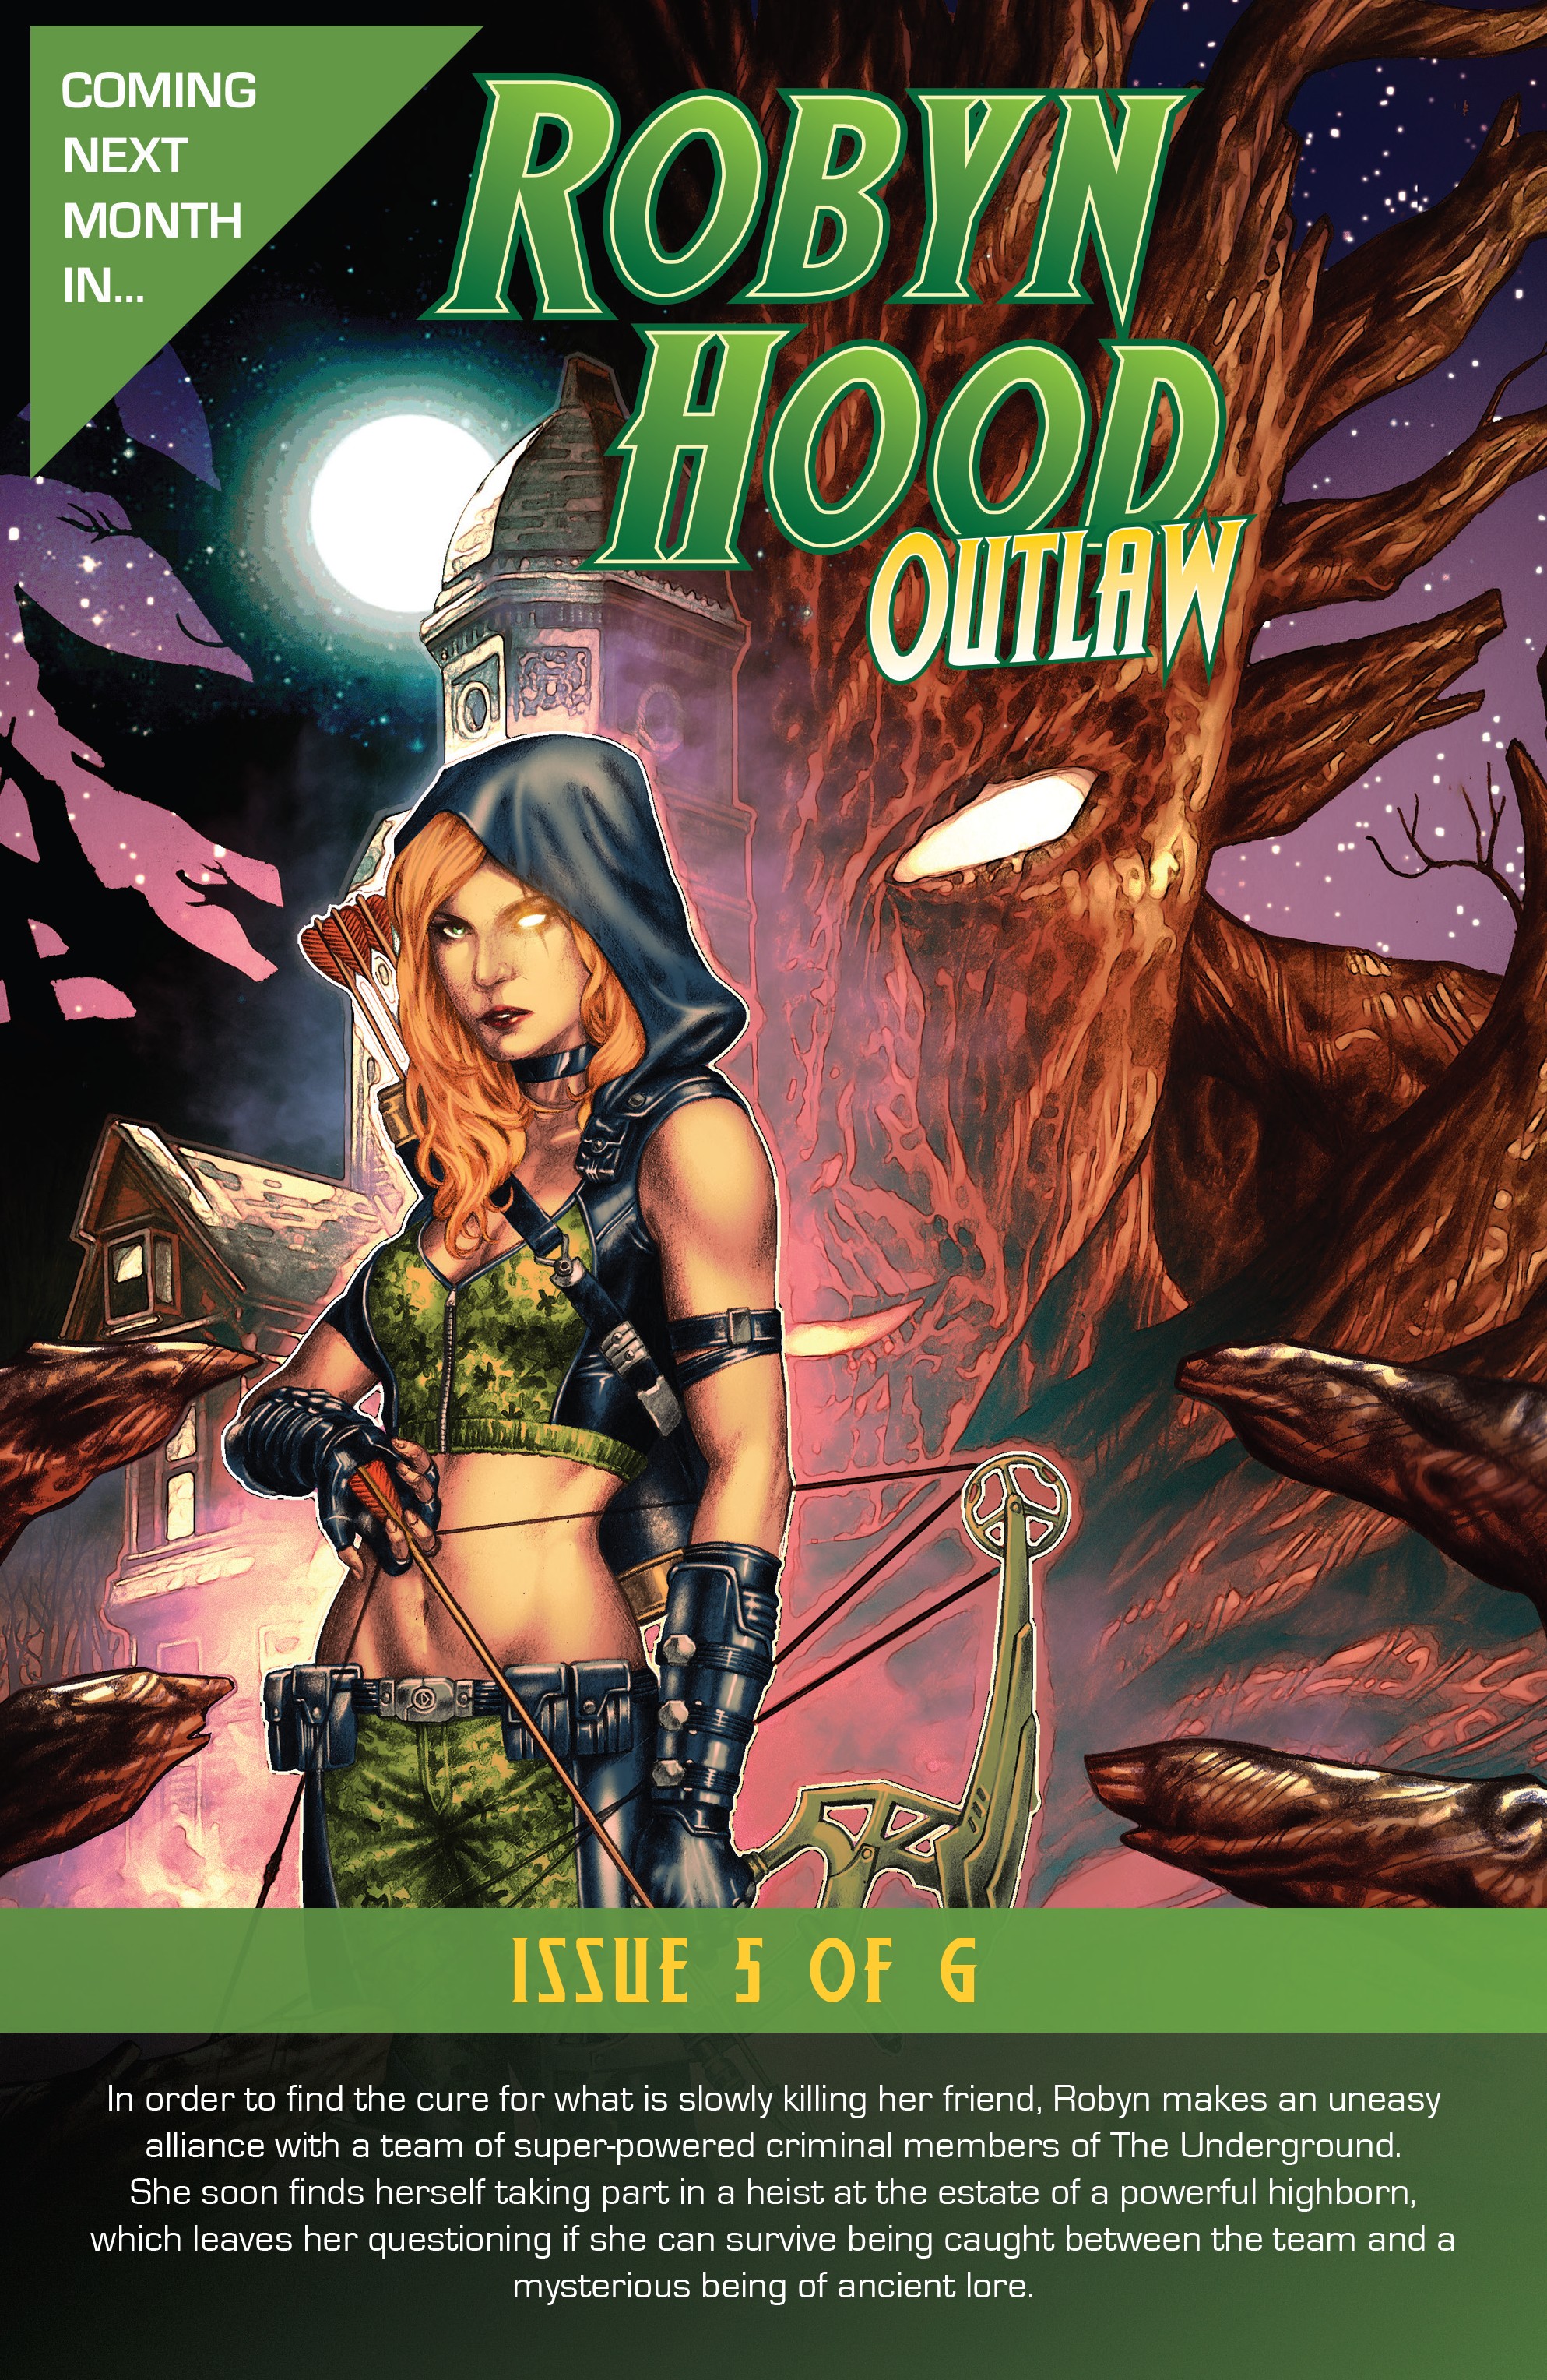 Robyn Hood Outlaw Issue 4 Read Robyn Hood Outlaw Issue 4 Comic Online